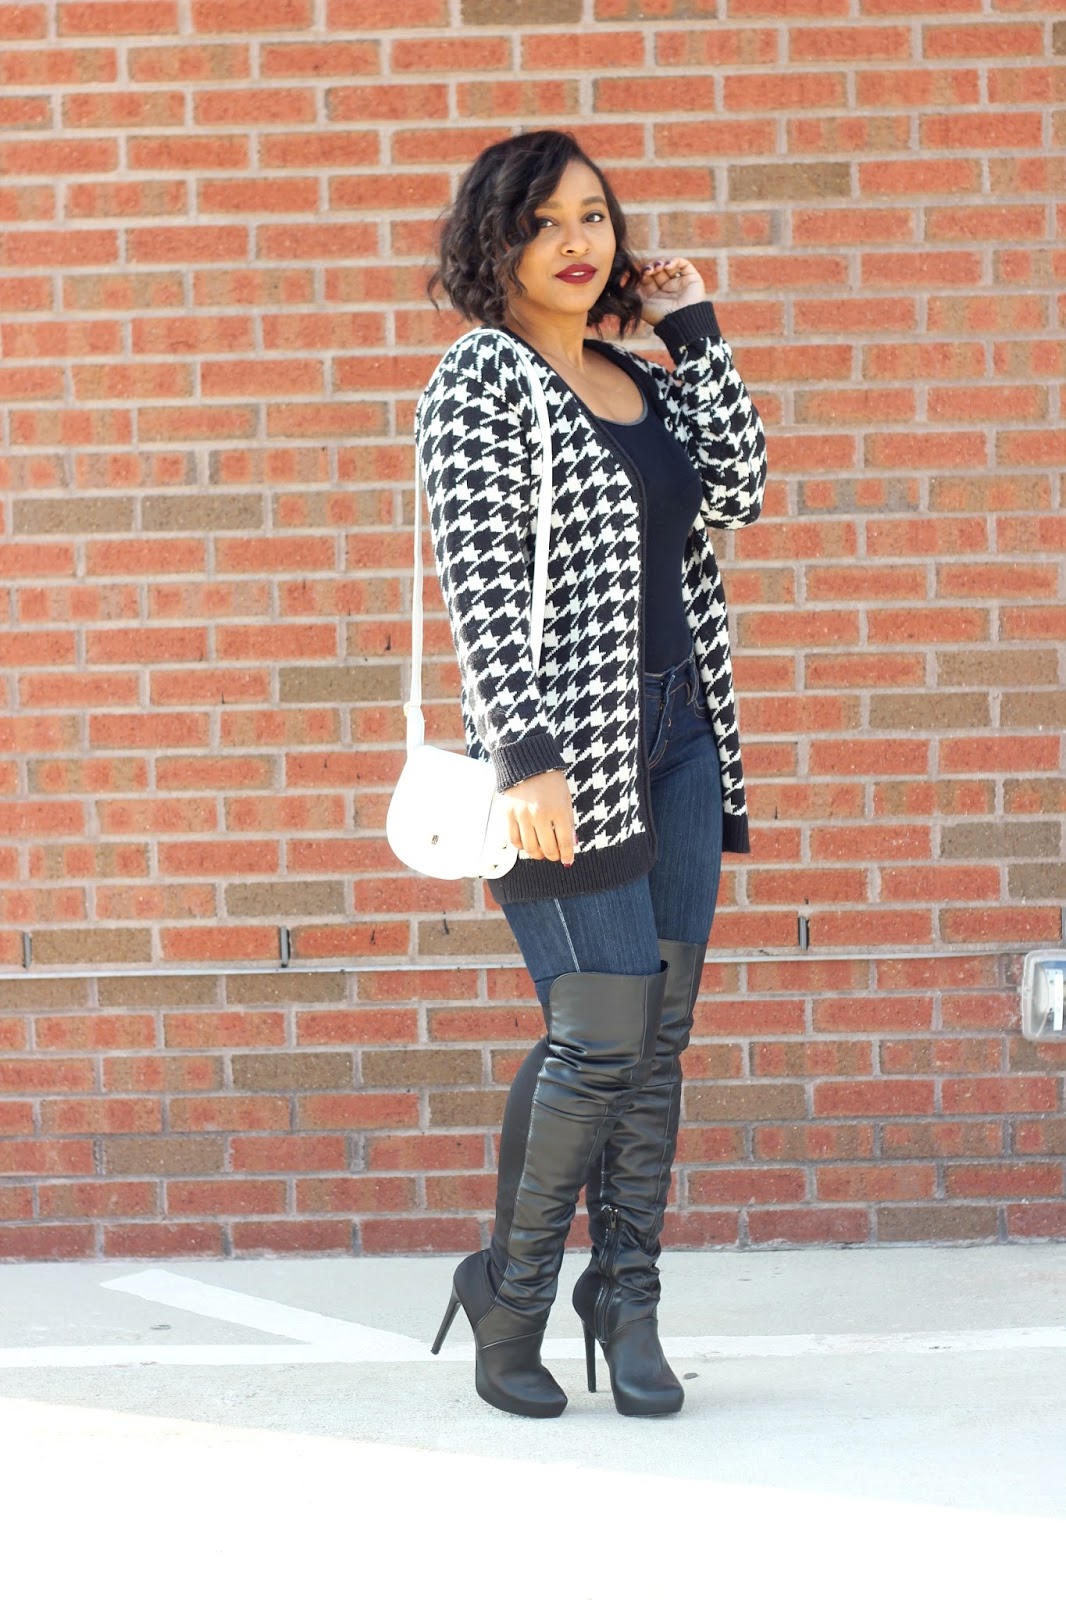 over the knee boots, otk, fall outfits, cardigans, houndstooth print, forever21